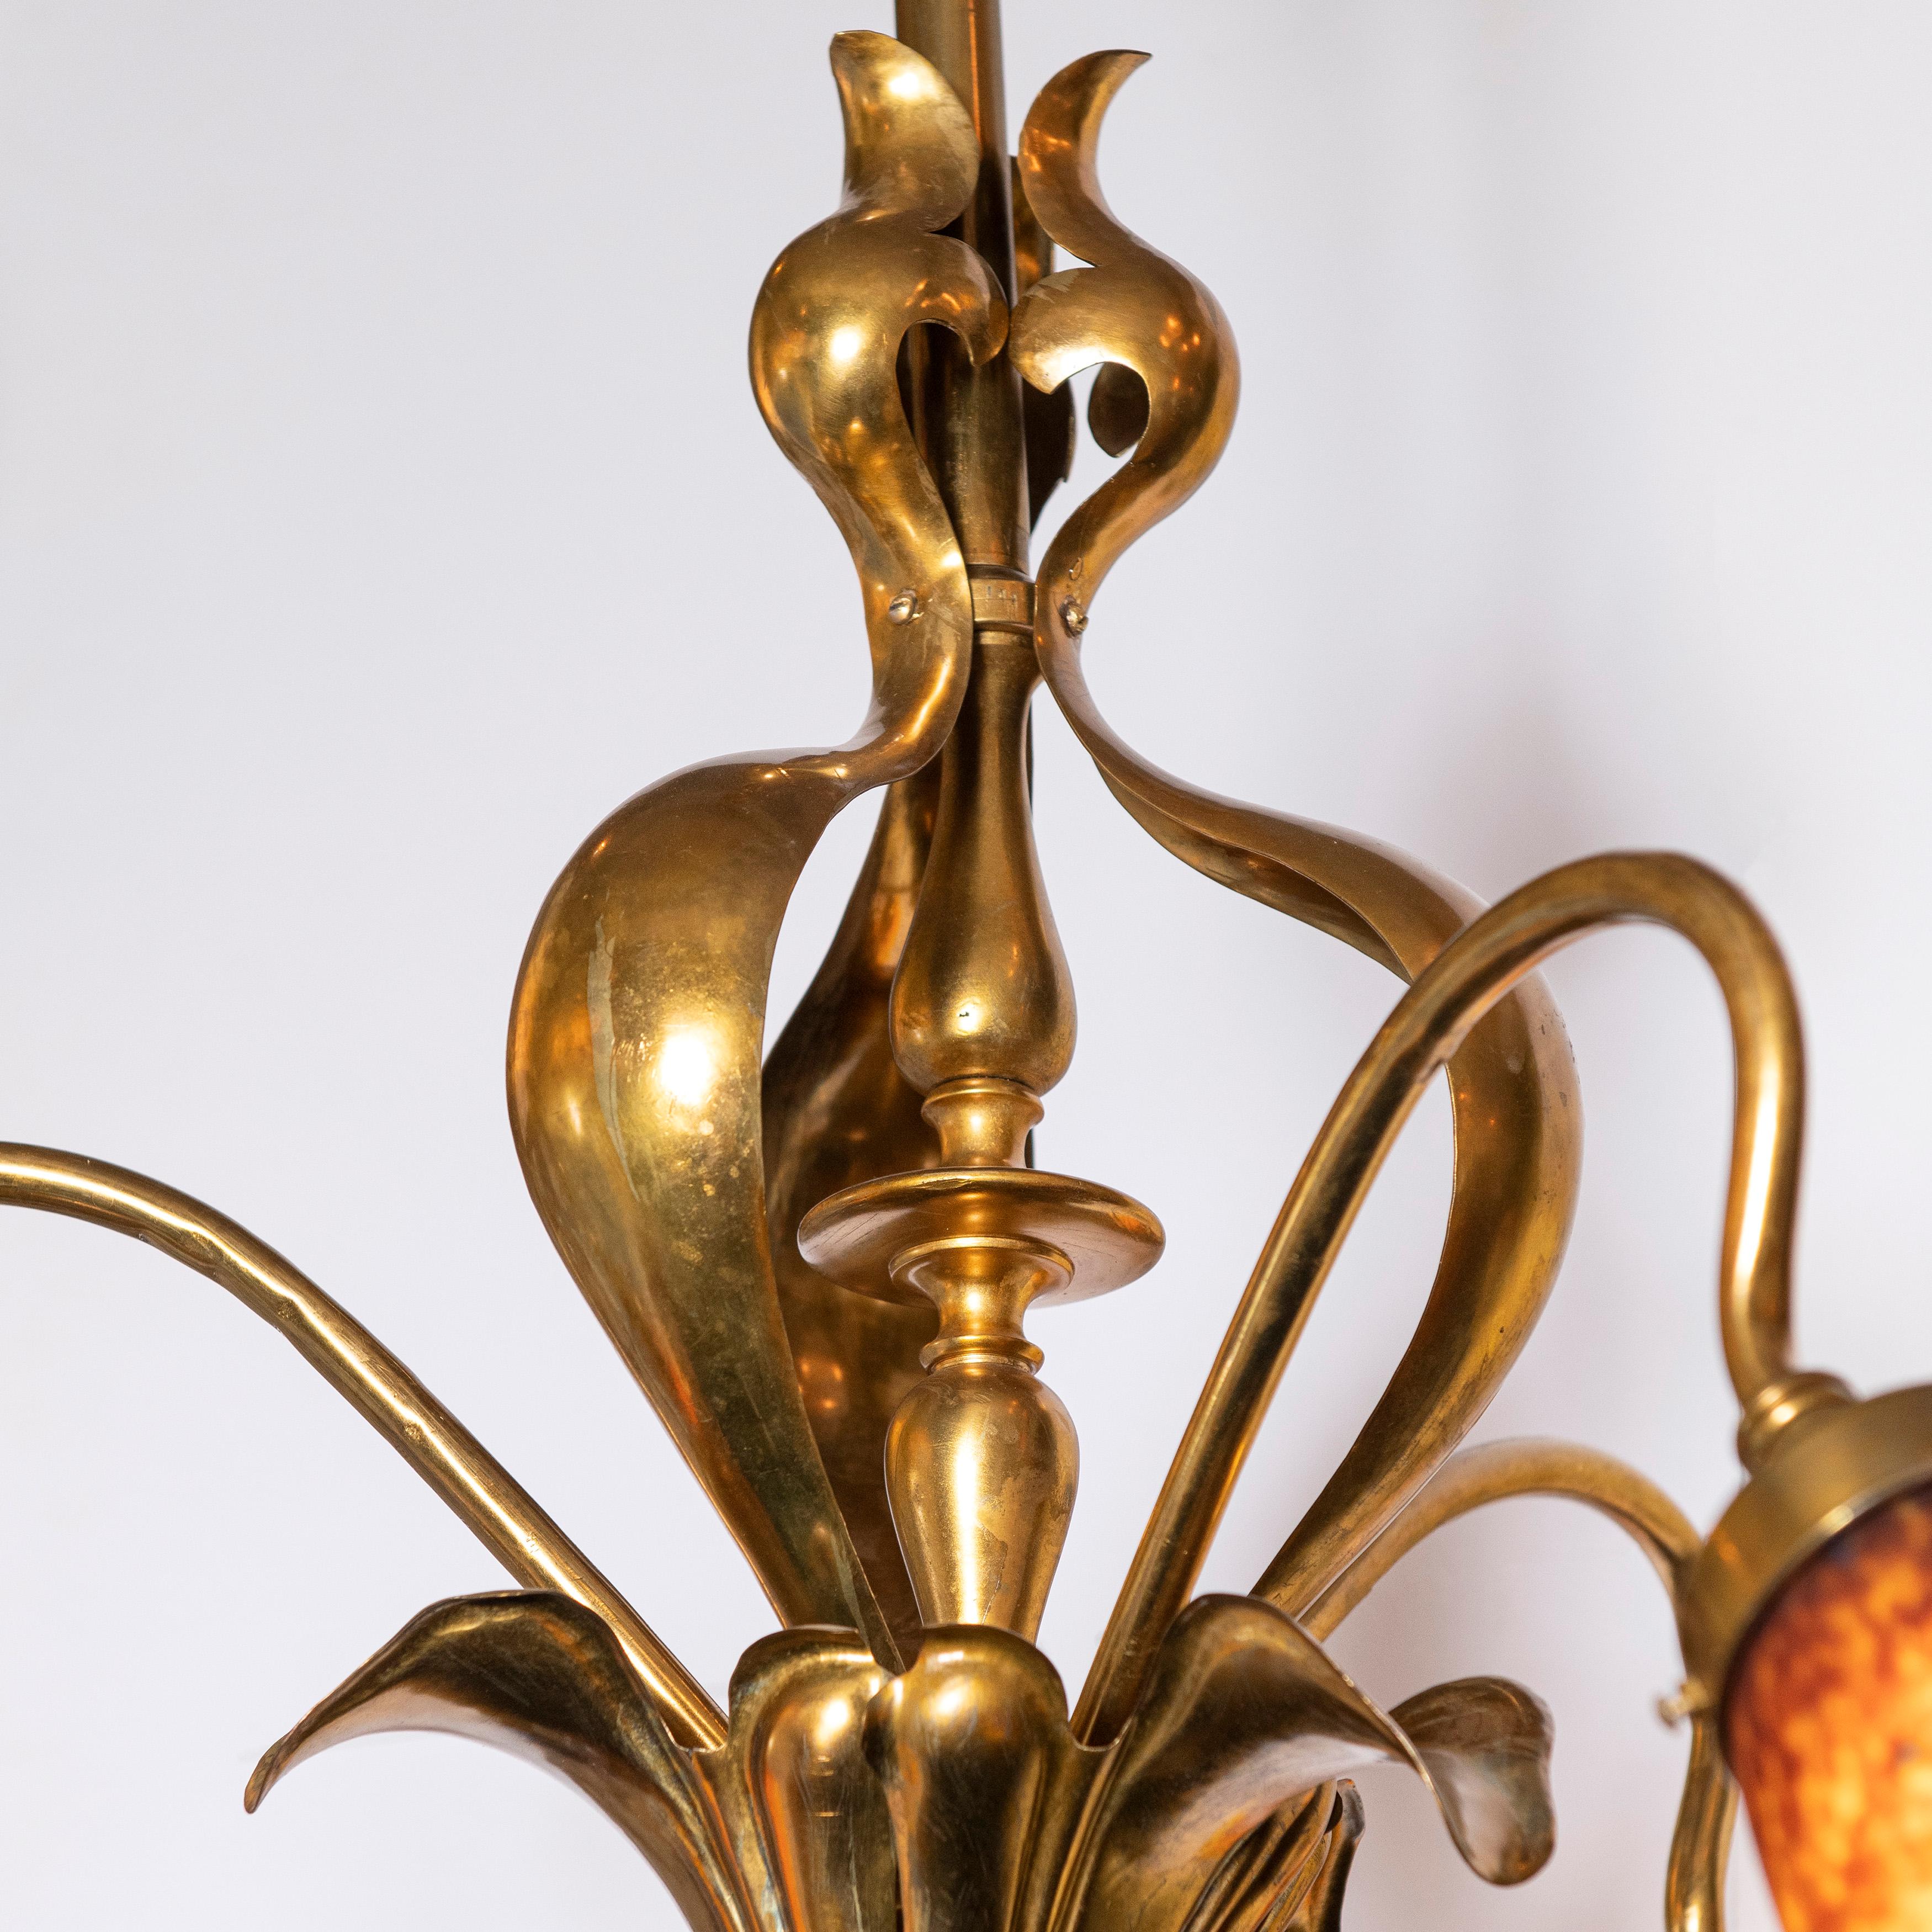 Bronze and artistic glass chandelier, Art Nouveau style, France, early 20th century.
Schneider glass tulips.
Three lights.